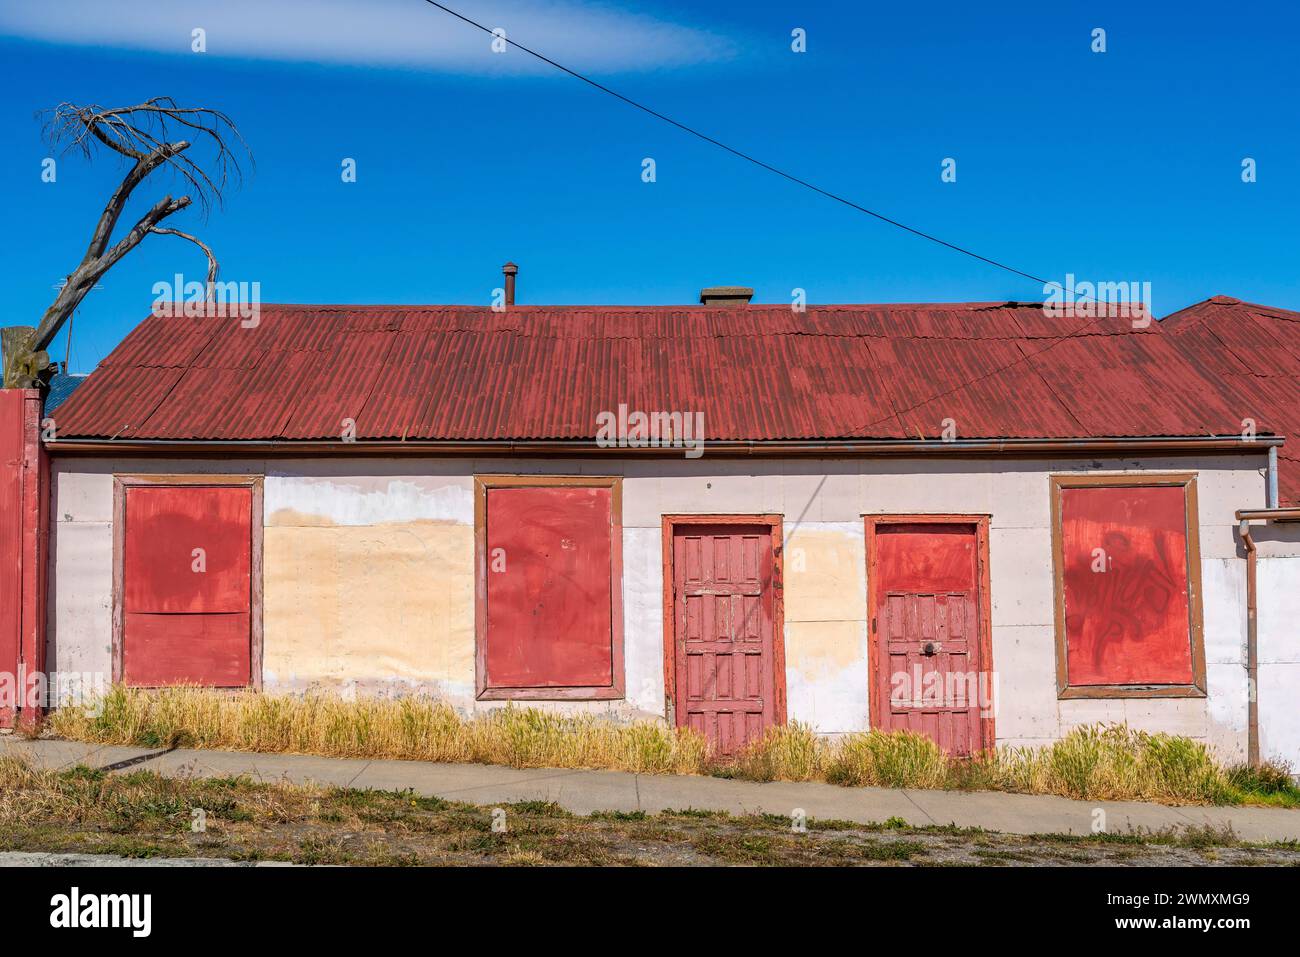 Boarded up house with red roof and red doors, city of Punta Arenas, Patagonia, Chile Stock Photo